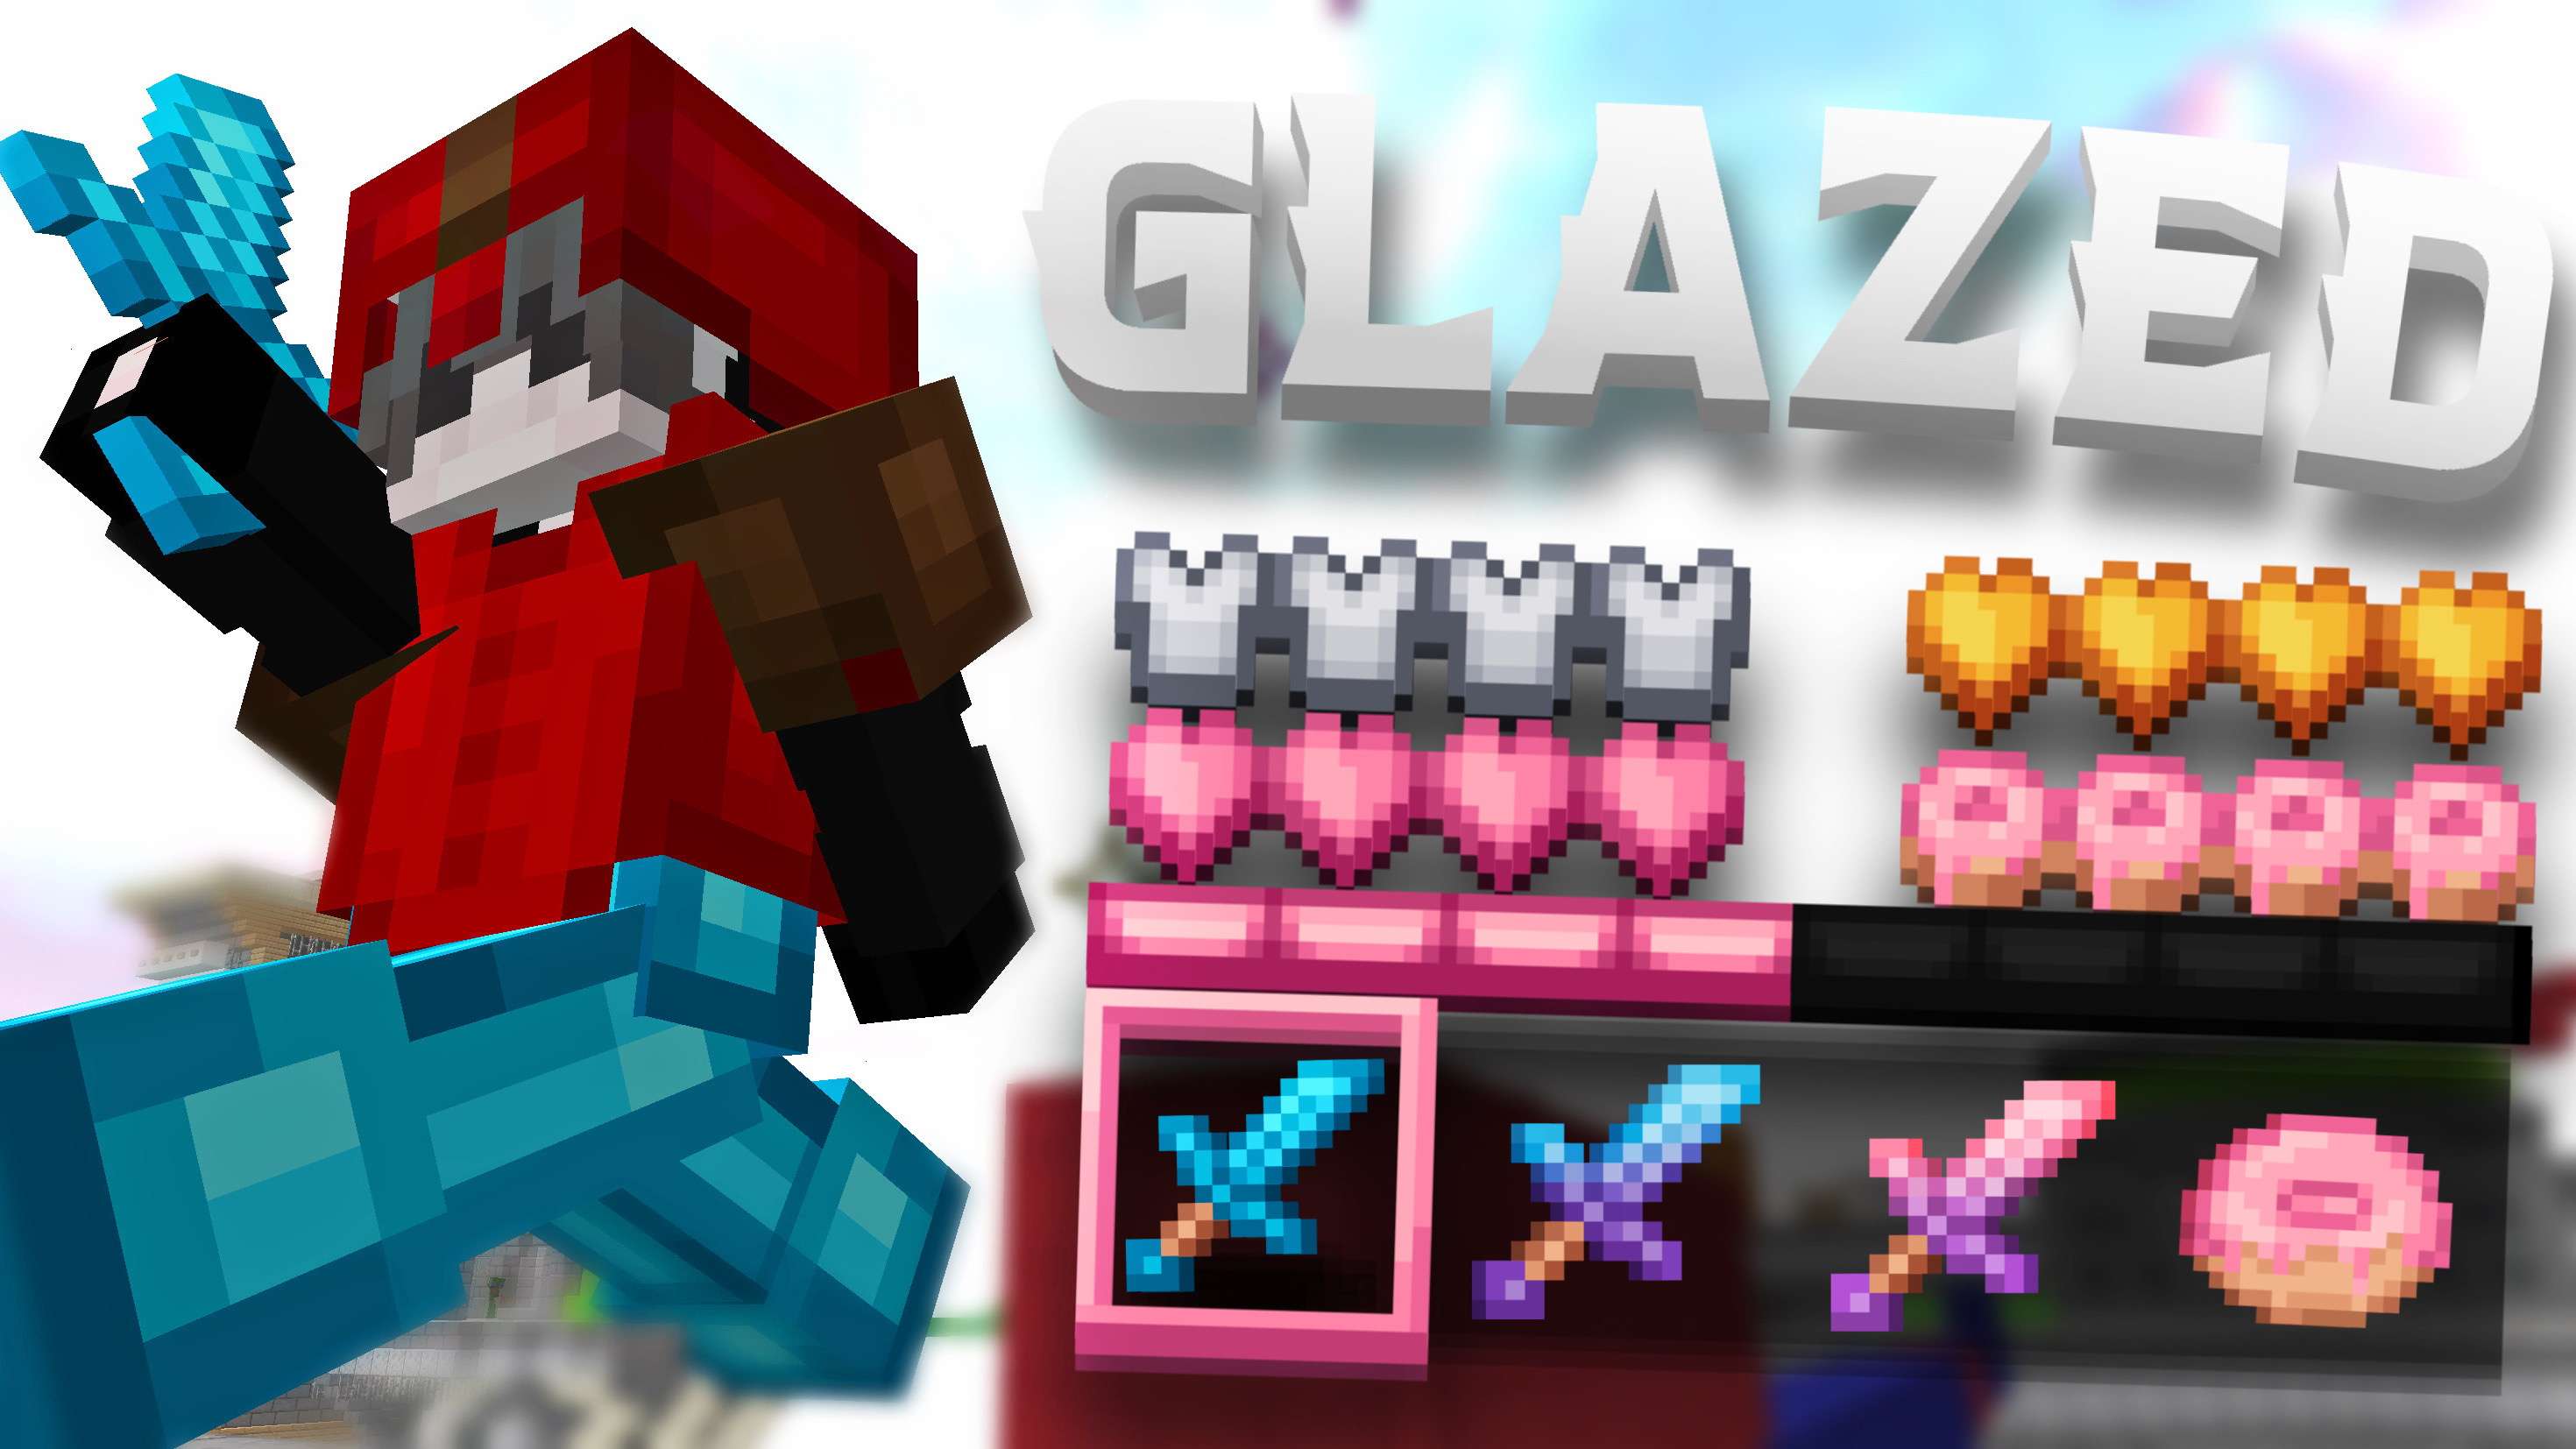 Gallery Banner for Glazed (Caramel) on PvPRP